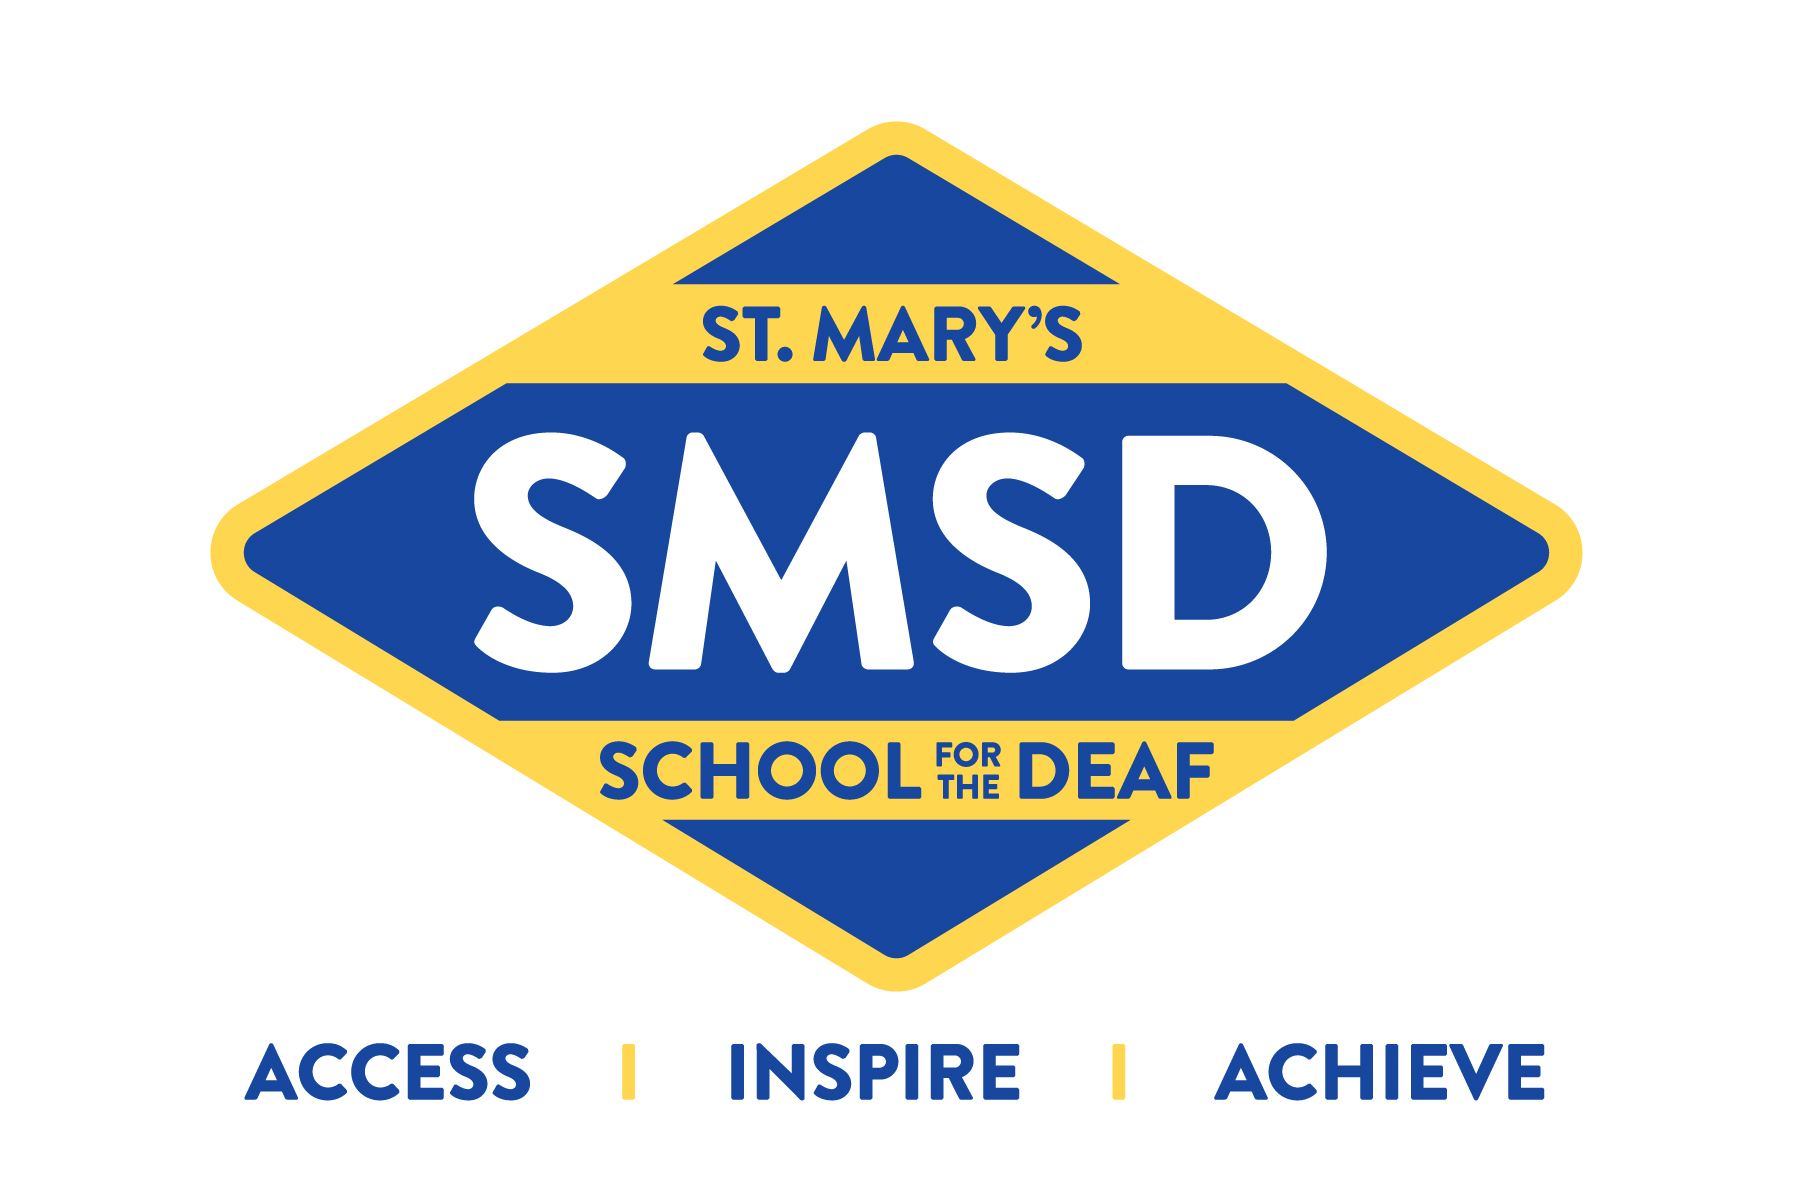 Organization logo of St. Mary's School for the Deaf